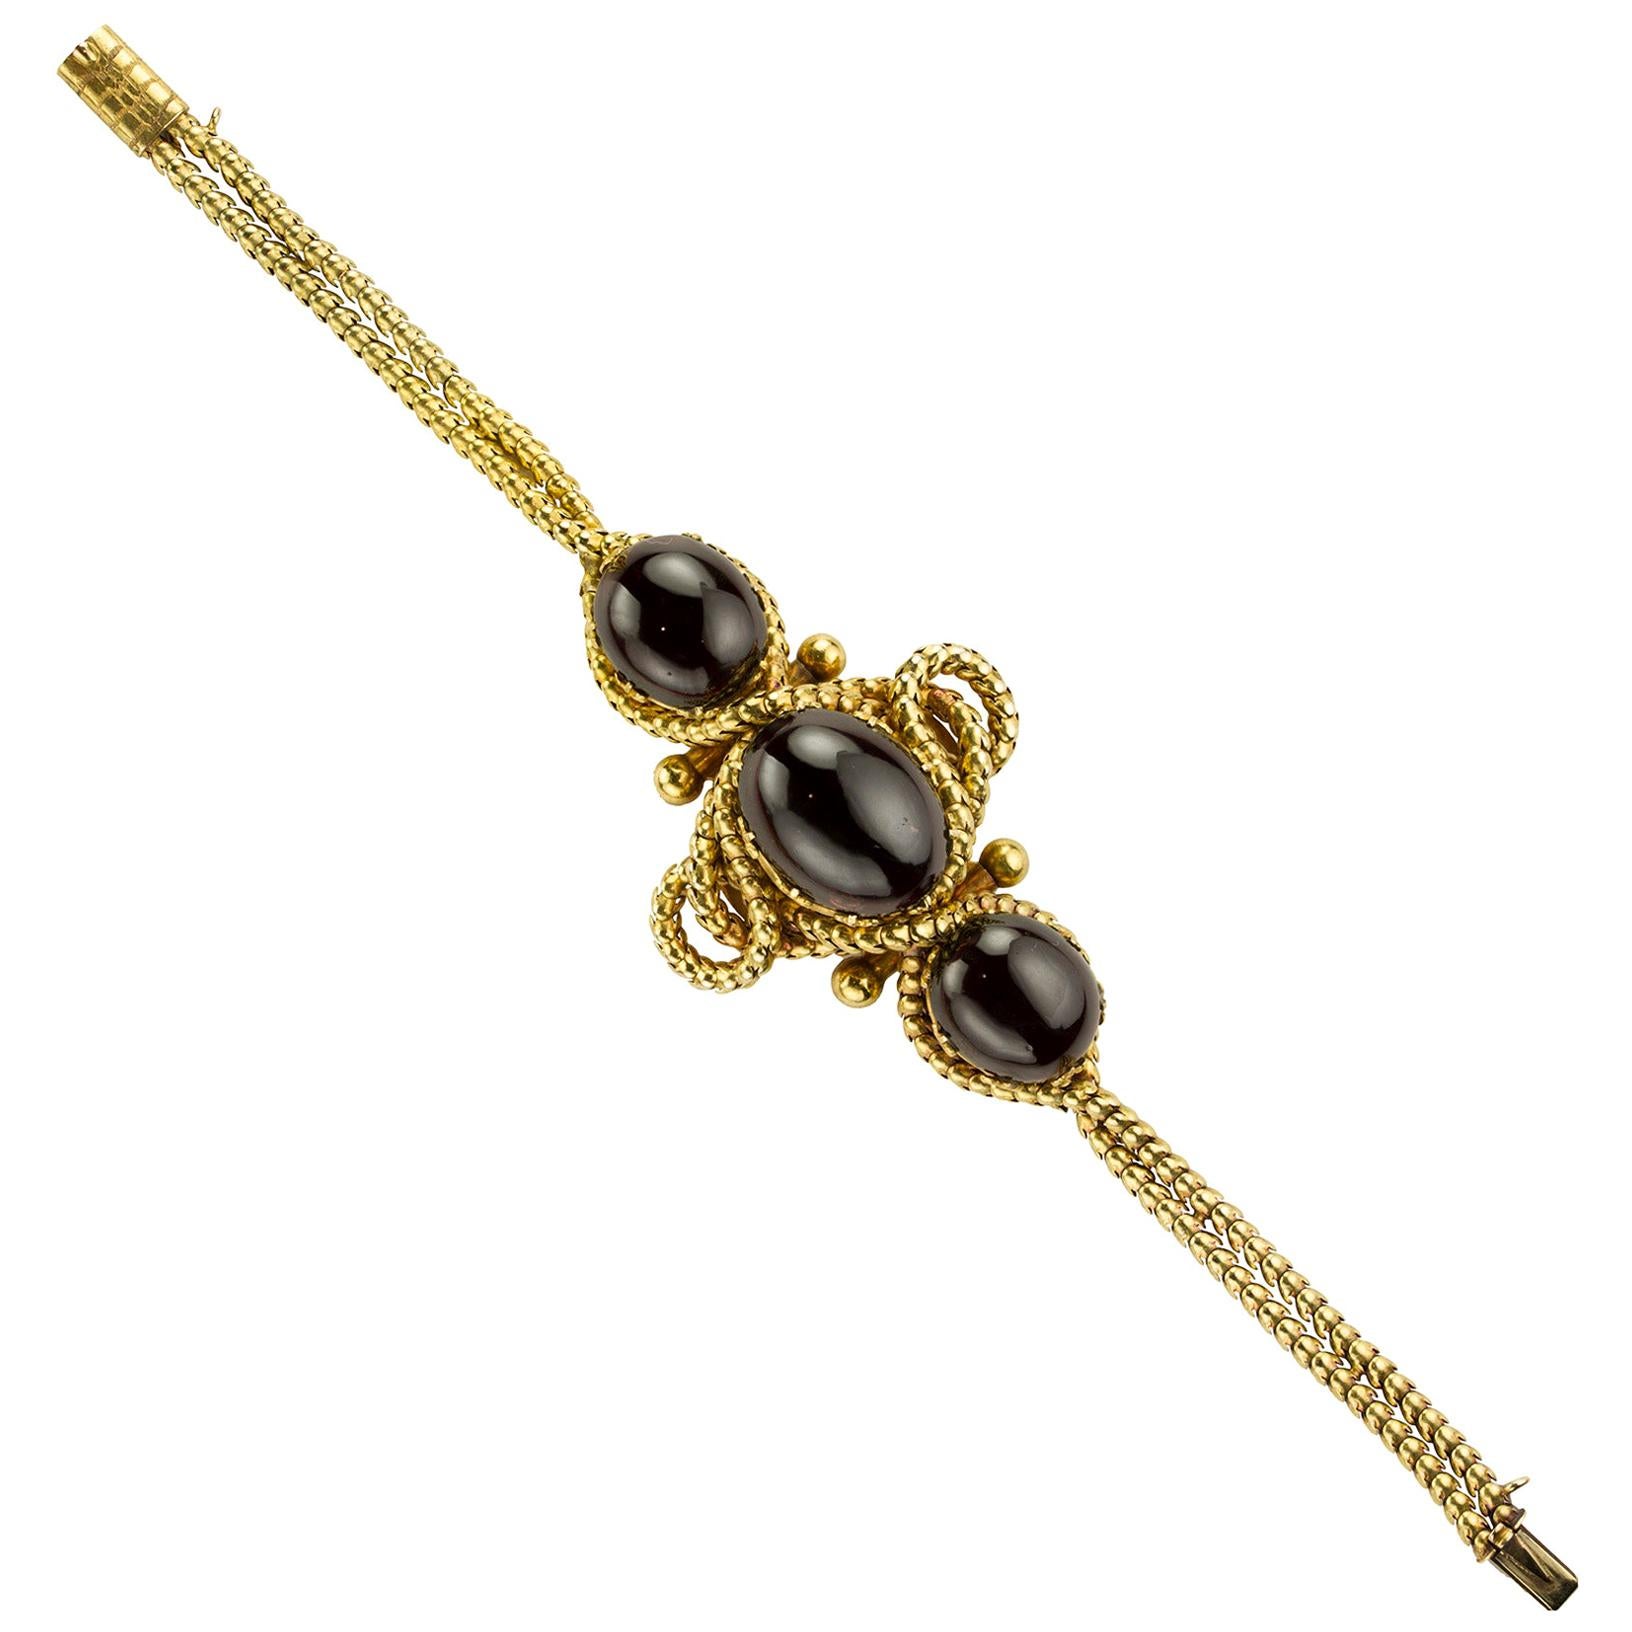 Cabochon Garnet and Yellow Gold Bracelet For Sale